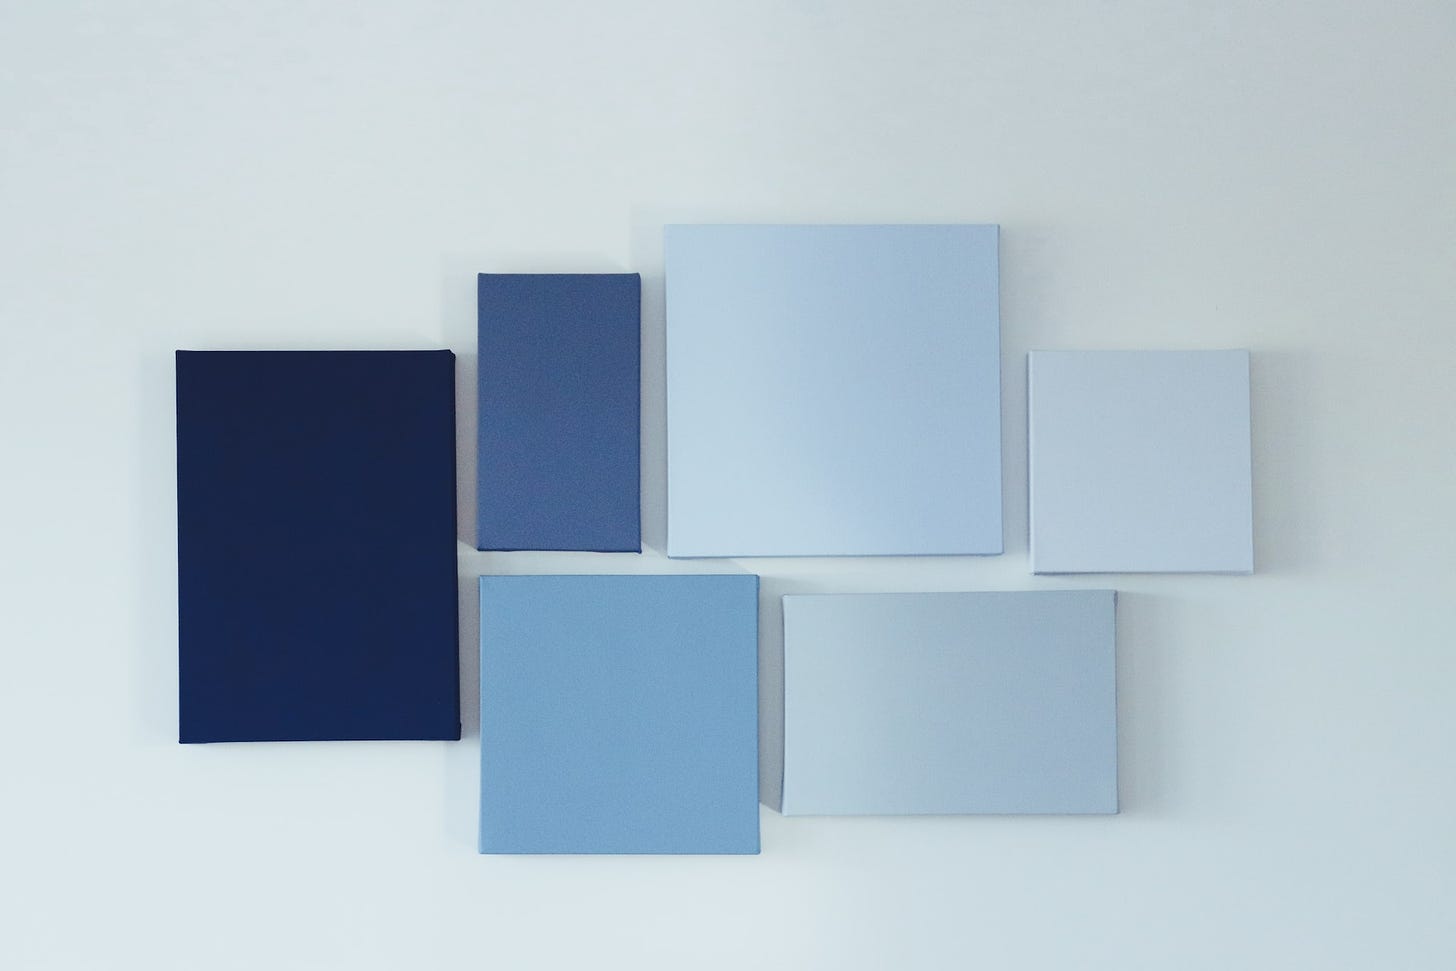 A collection of blank canvases in various shades of blue.